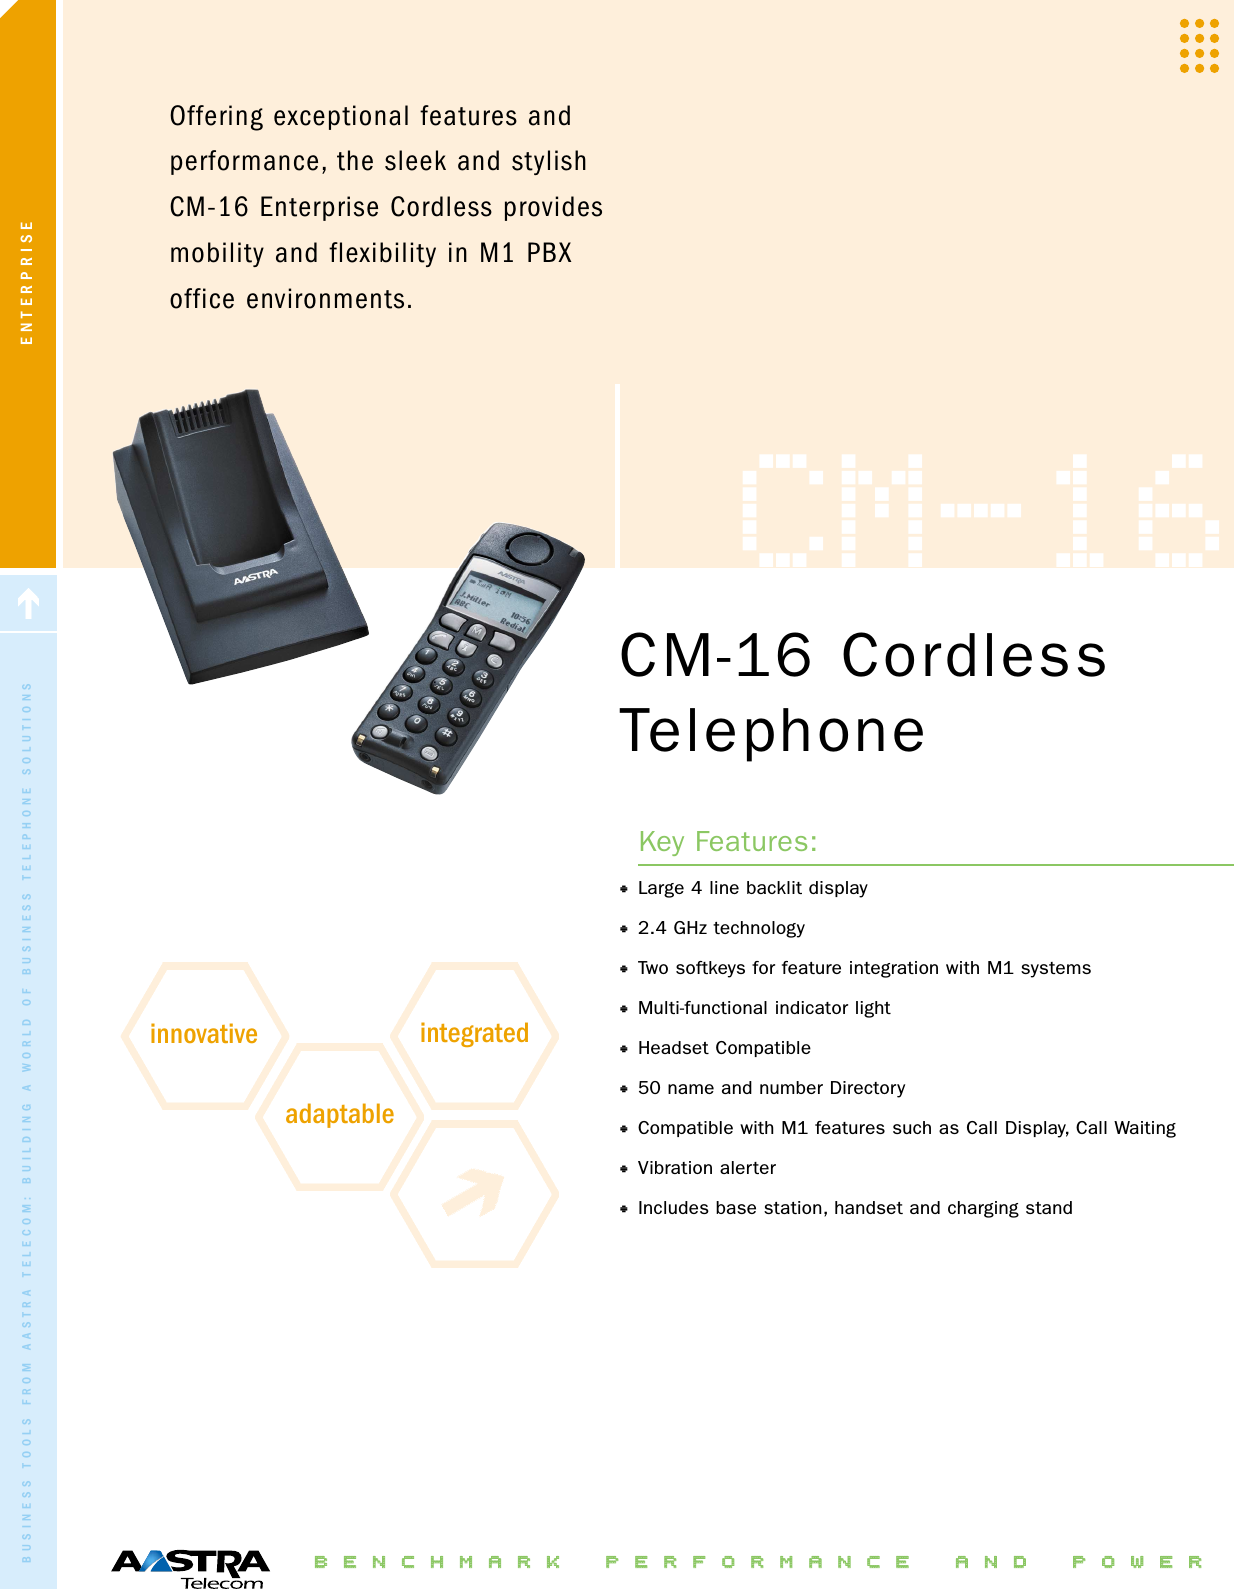 ENTERPRISEOffering exceptional features andperformance, the sleek and stylishCM-16 Enterprise Cordless providesmobility and flexibility in M1 PBXoffice environments.BBEENNCCHHMMAARRKK PPEERRFFOORRMMAANNCCEE AANNDD PPOOWWEERRCM-16 CordlessTelephoneKey Features:•Large 4 line backlit display•2.4 GHz technology•Two softkeys for feature integration with M1 systems•Multi-functional indicator light•Headset Compatible•50 name and number Directory •Compatible with M1 features such as Call Display, Call Waiting•Vibration alerter•Includes base station, handset and charging standBUSINESS TOOLS FROM AASTRA TELECOM: BUILDING A WORLD OF BUSINESS TELEPHONE SOLUTIONSCM-16innovative integratedadaptable